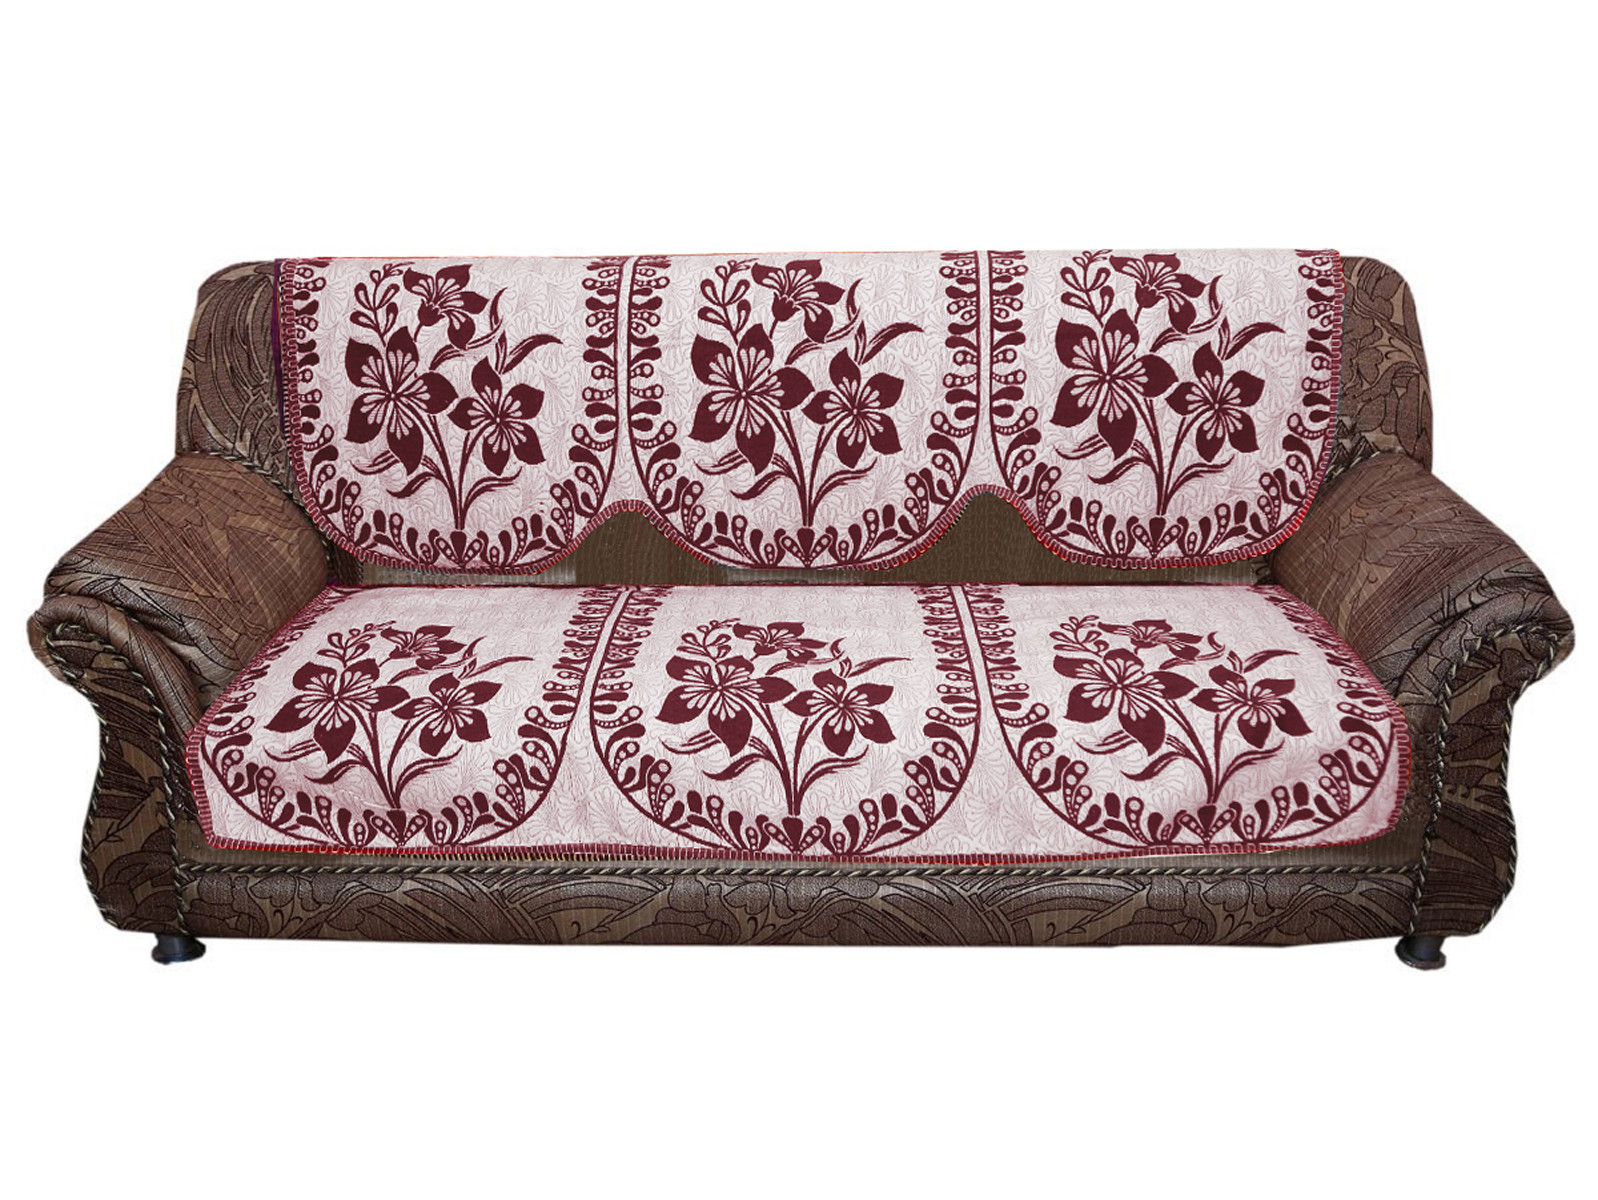 Kuber Industries Luxurious Cotton Floral Design 5 Seater Sofa Cover Set for Living Room (Maroon)